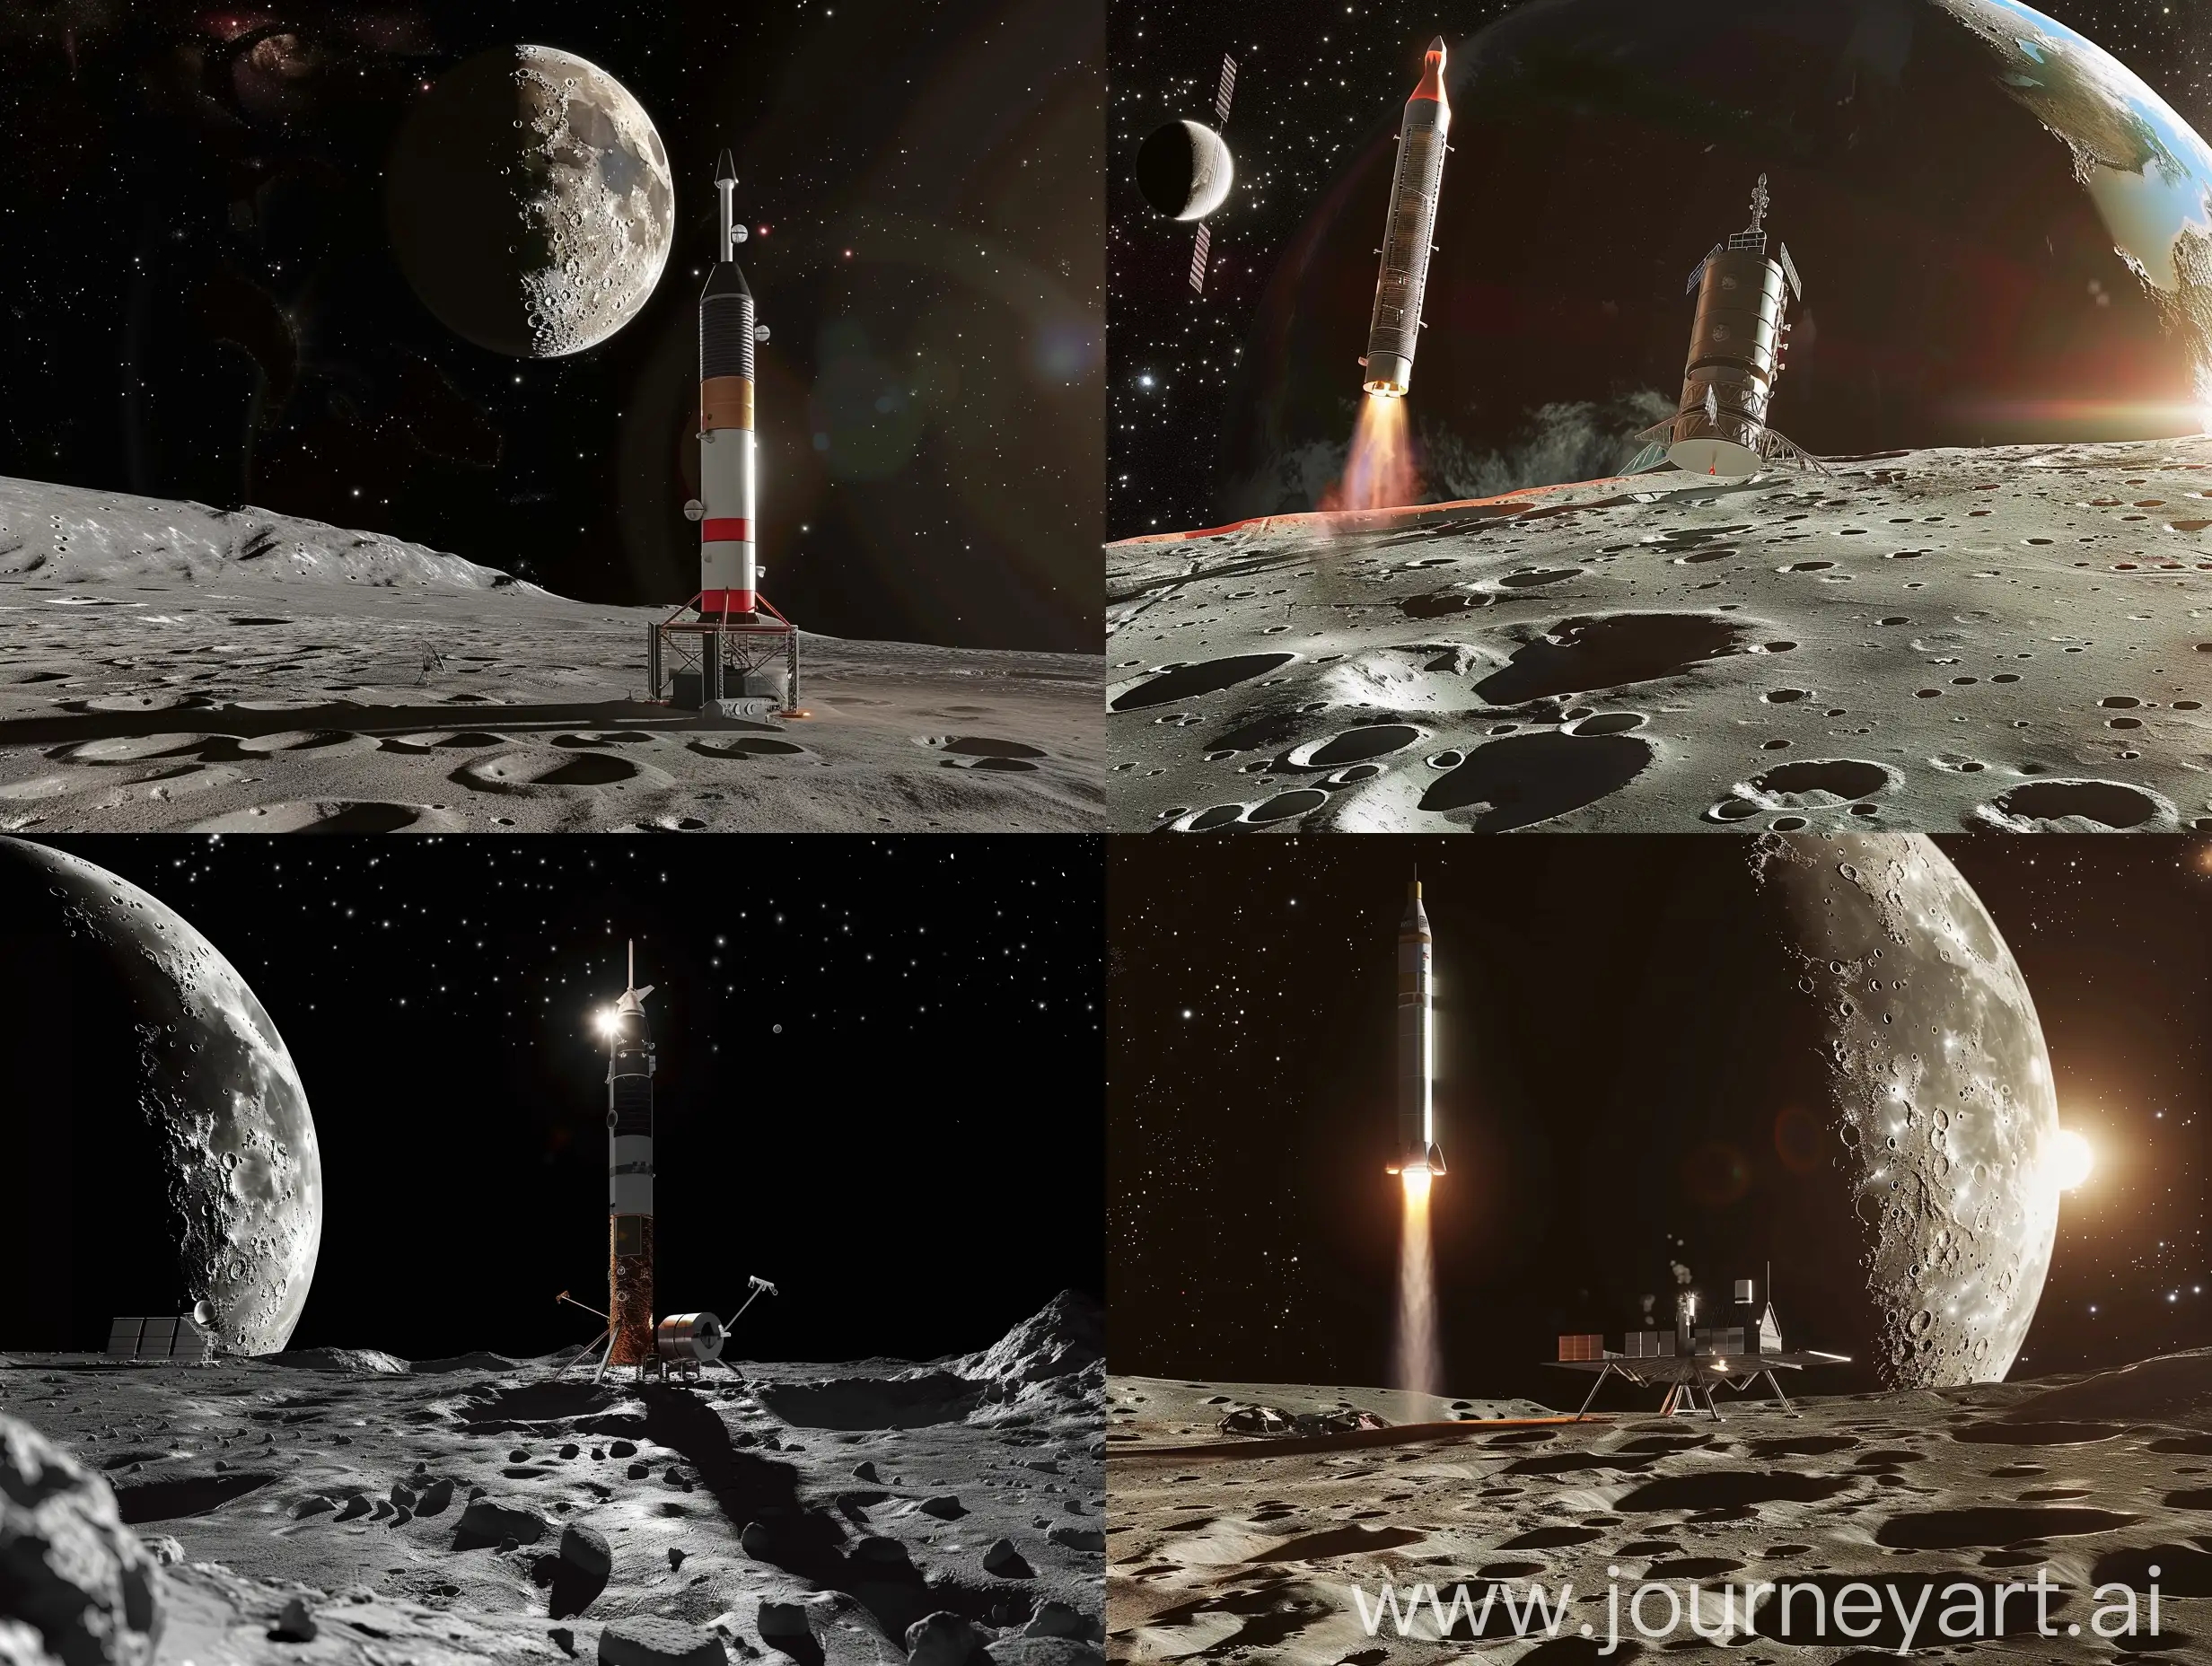 visualize the image showing GLSV MK-III satellite Launch on earth and show vikram lander on moon